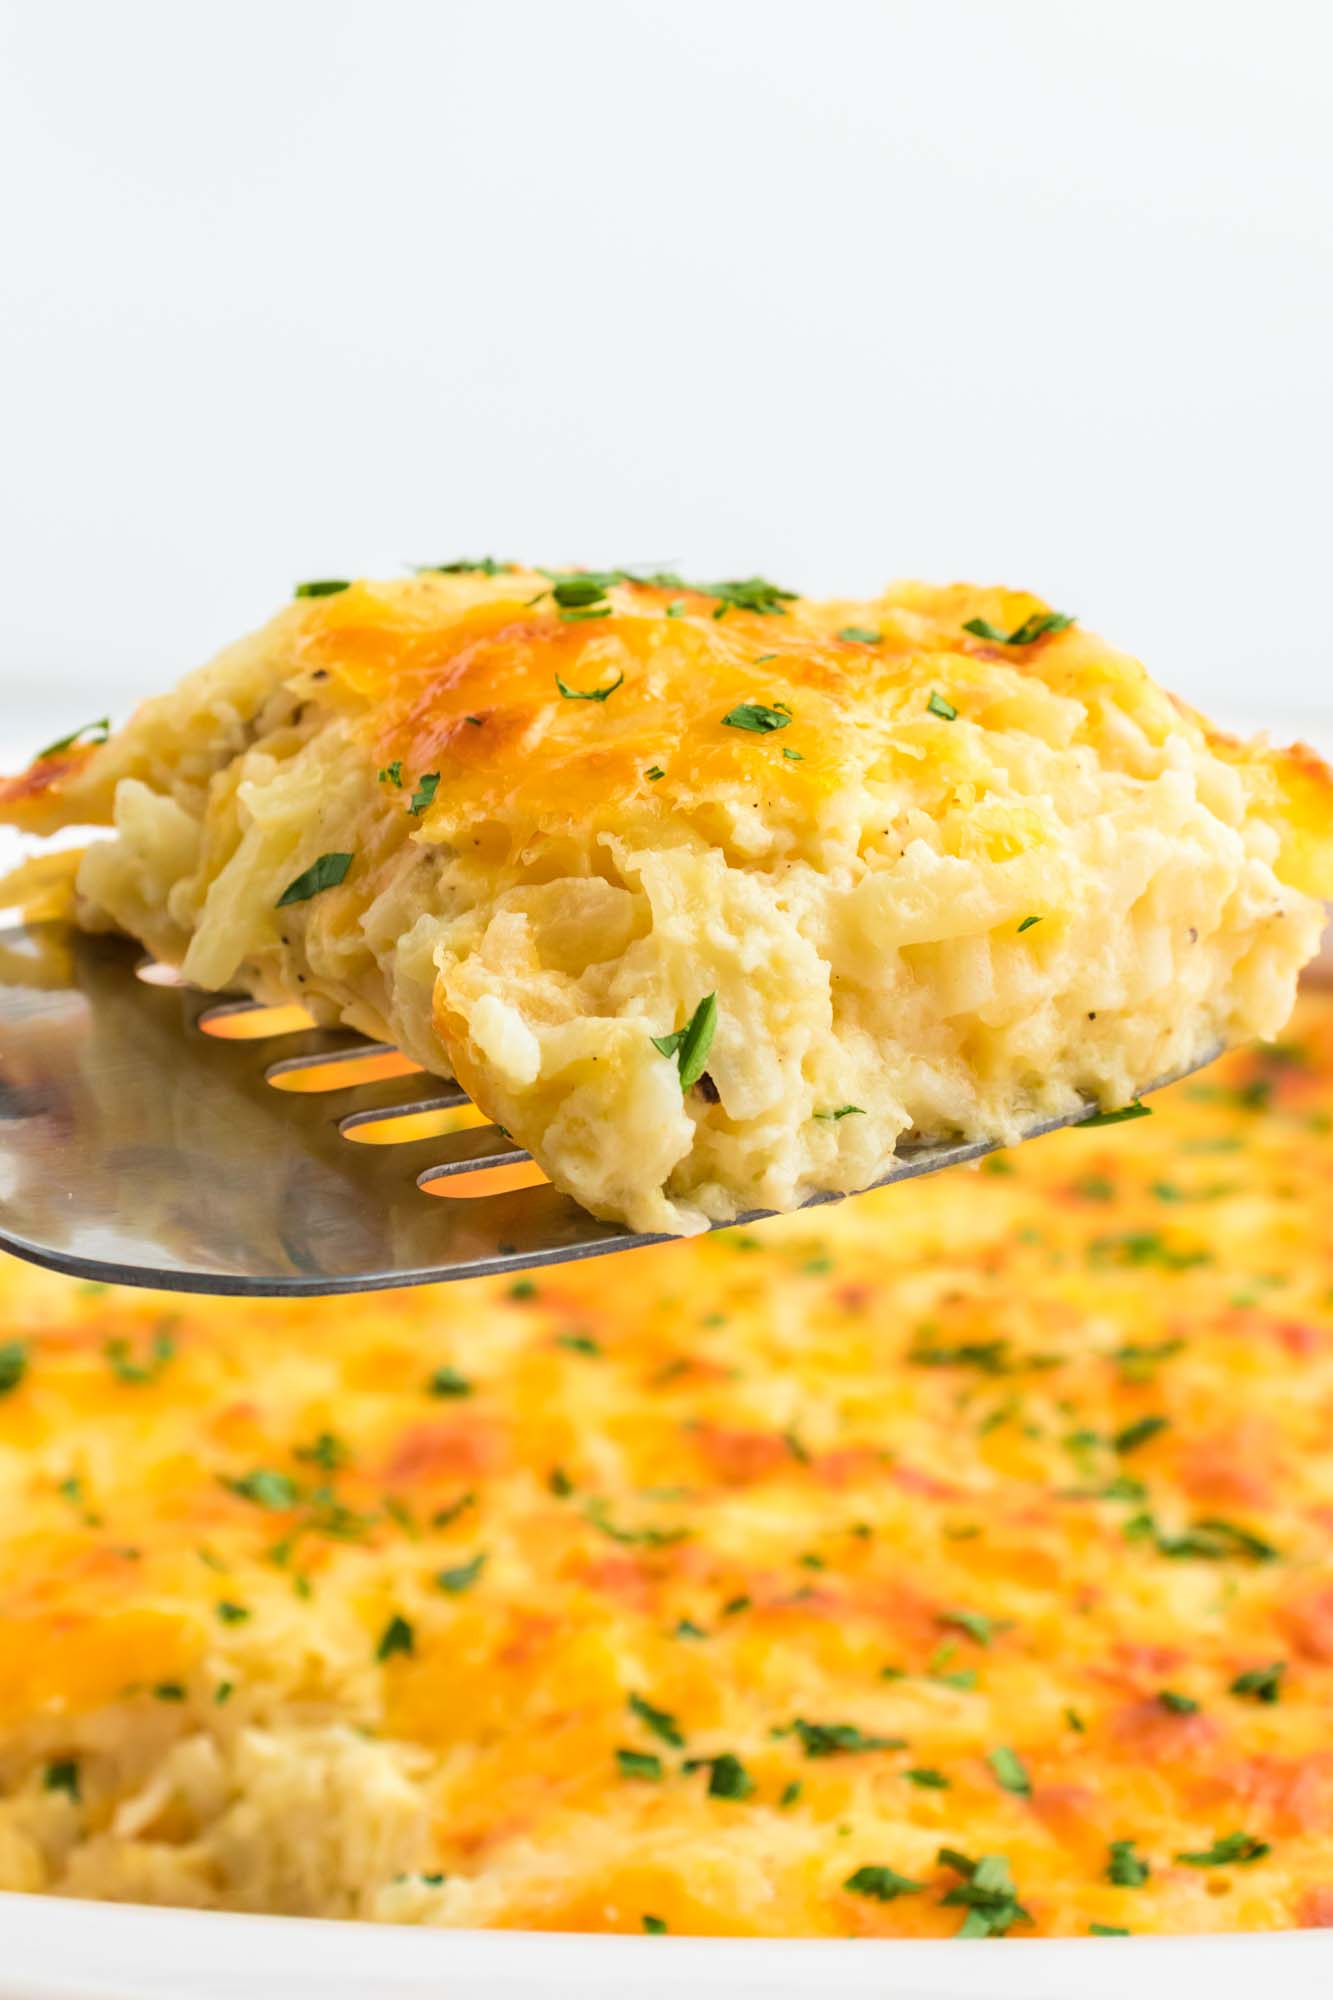 A slice of cheesy casserole being served from the casserole dish